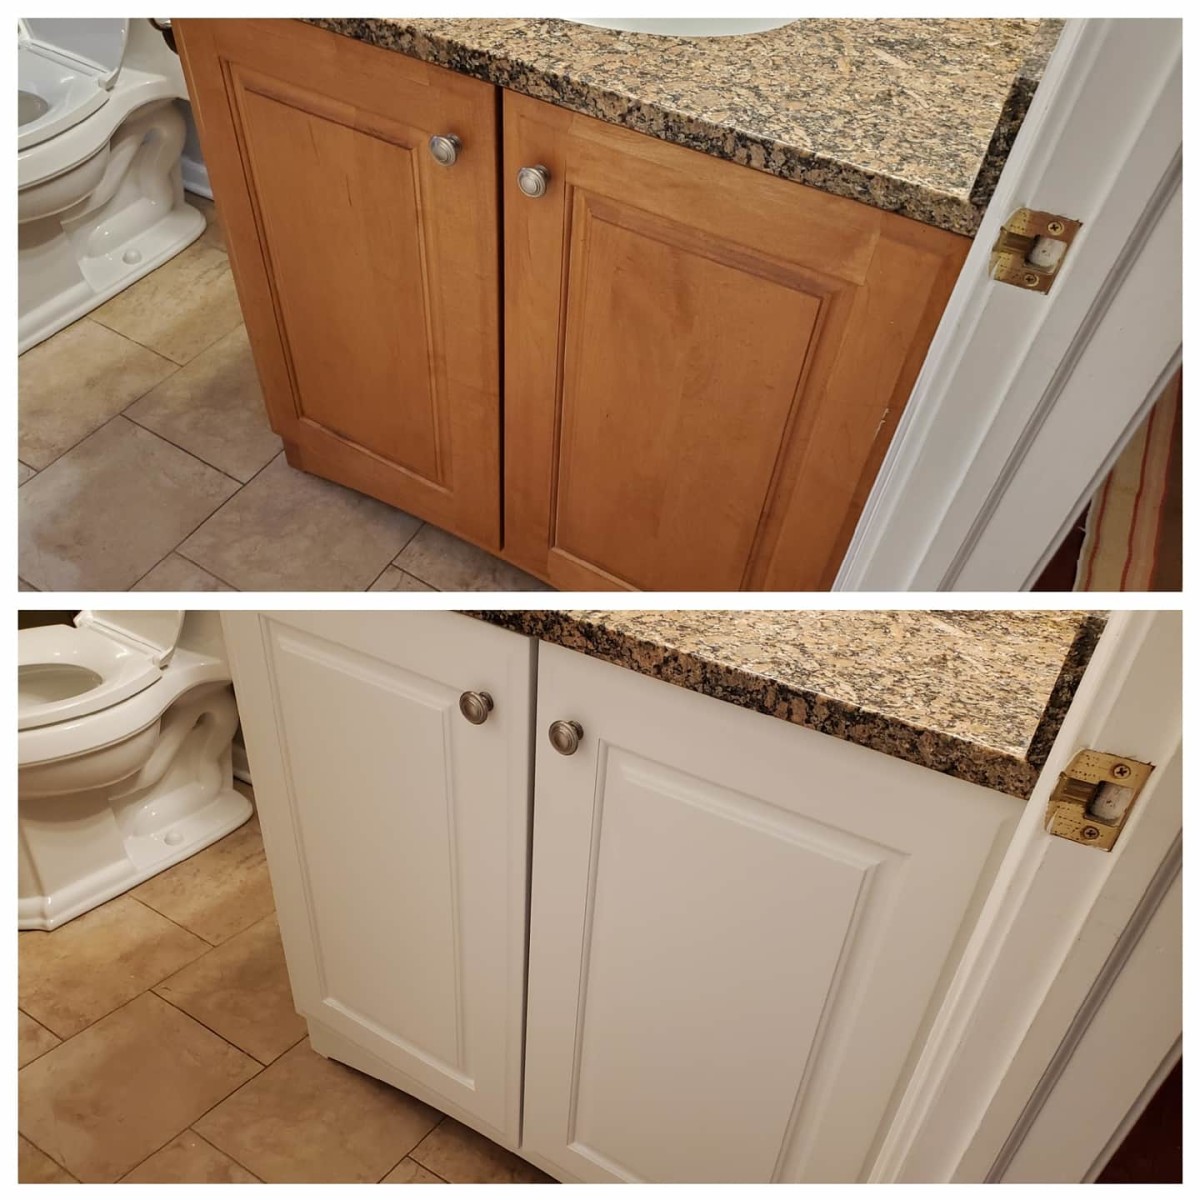 Tips For Painting A Bathroom Vanity, How Do You Paint Wooden Bathroom Cabinets